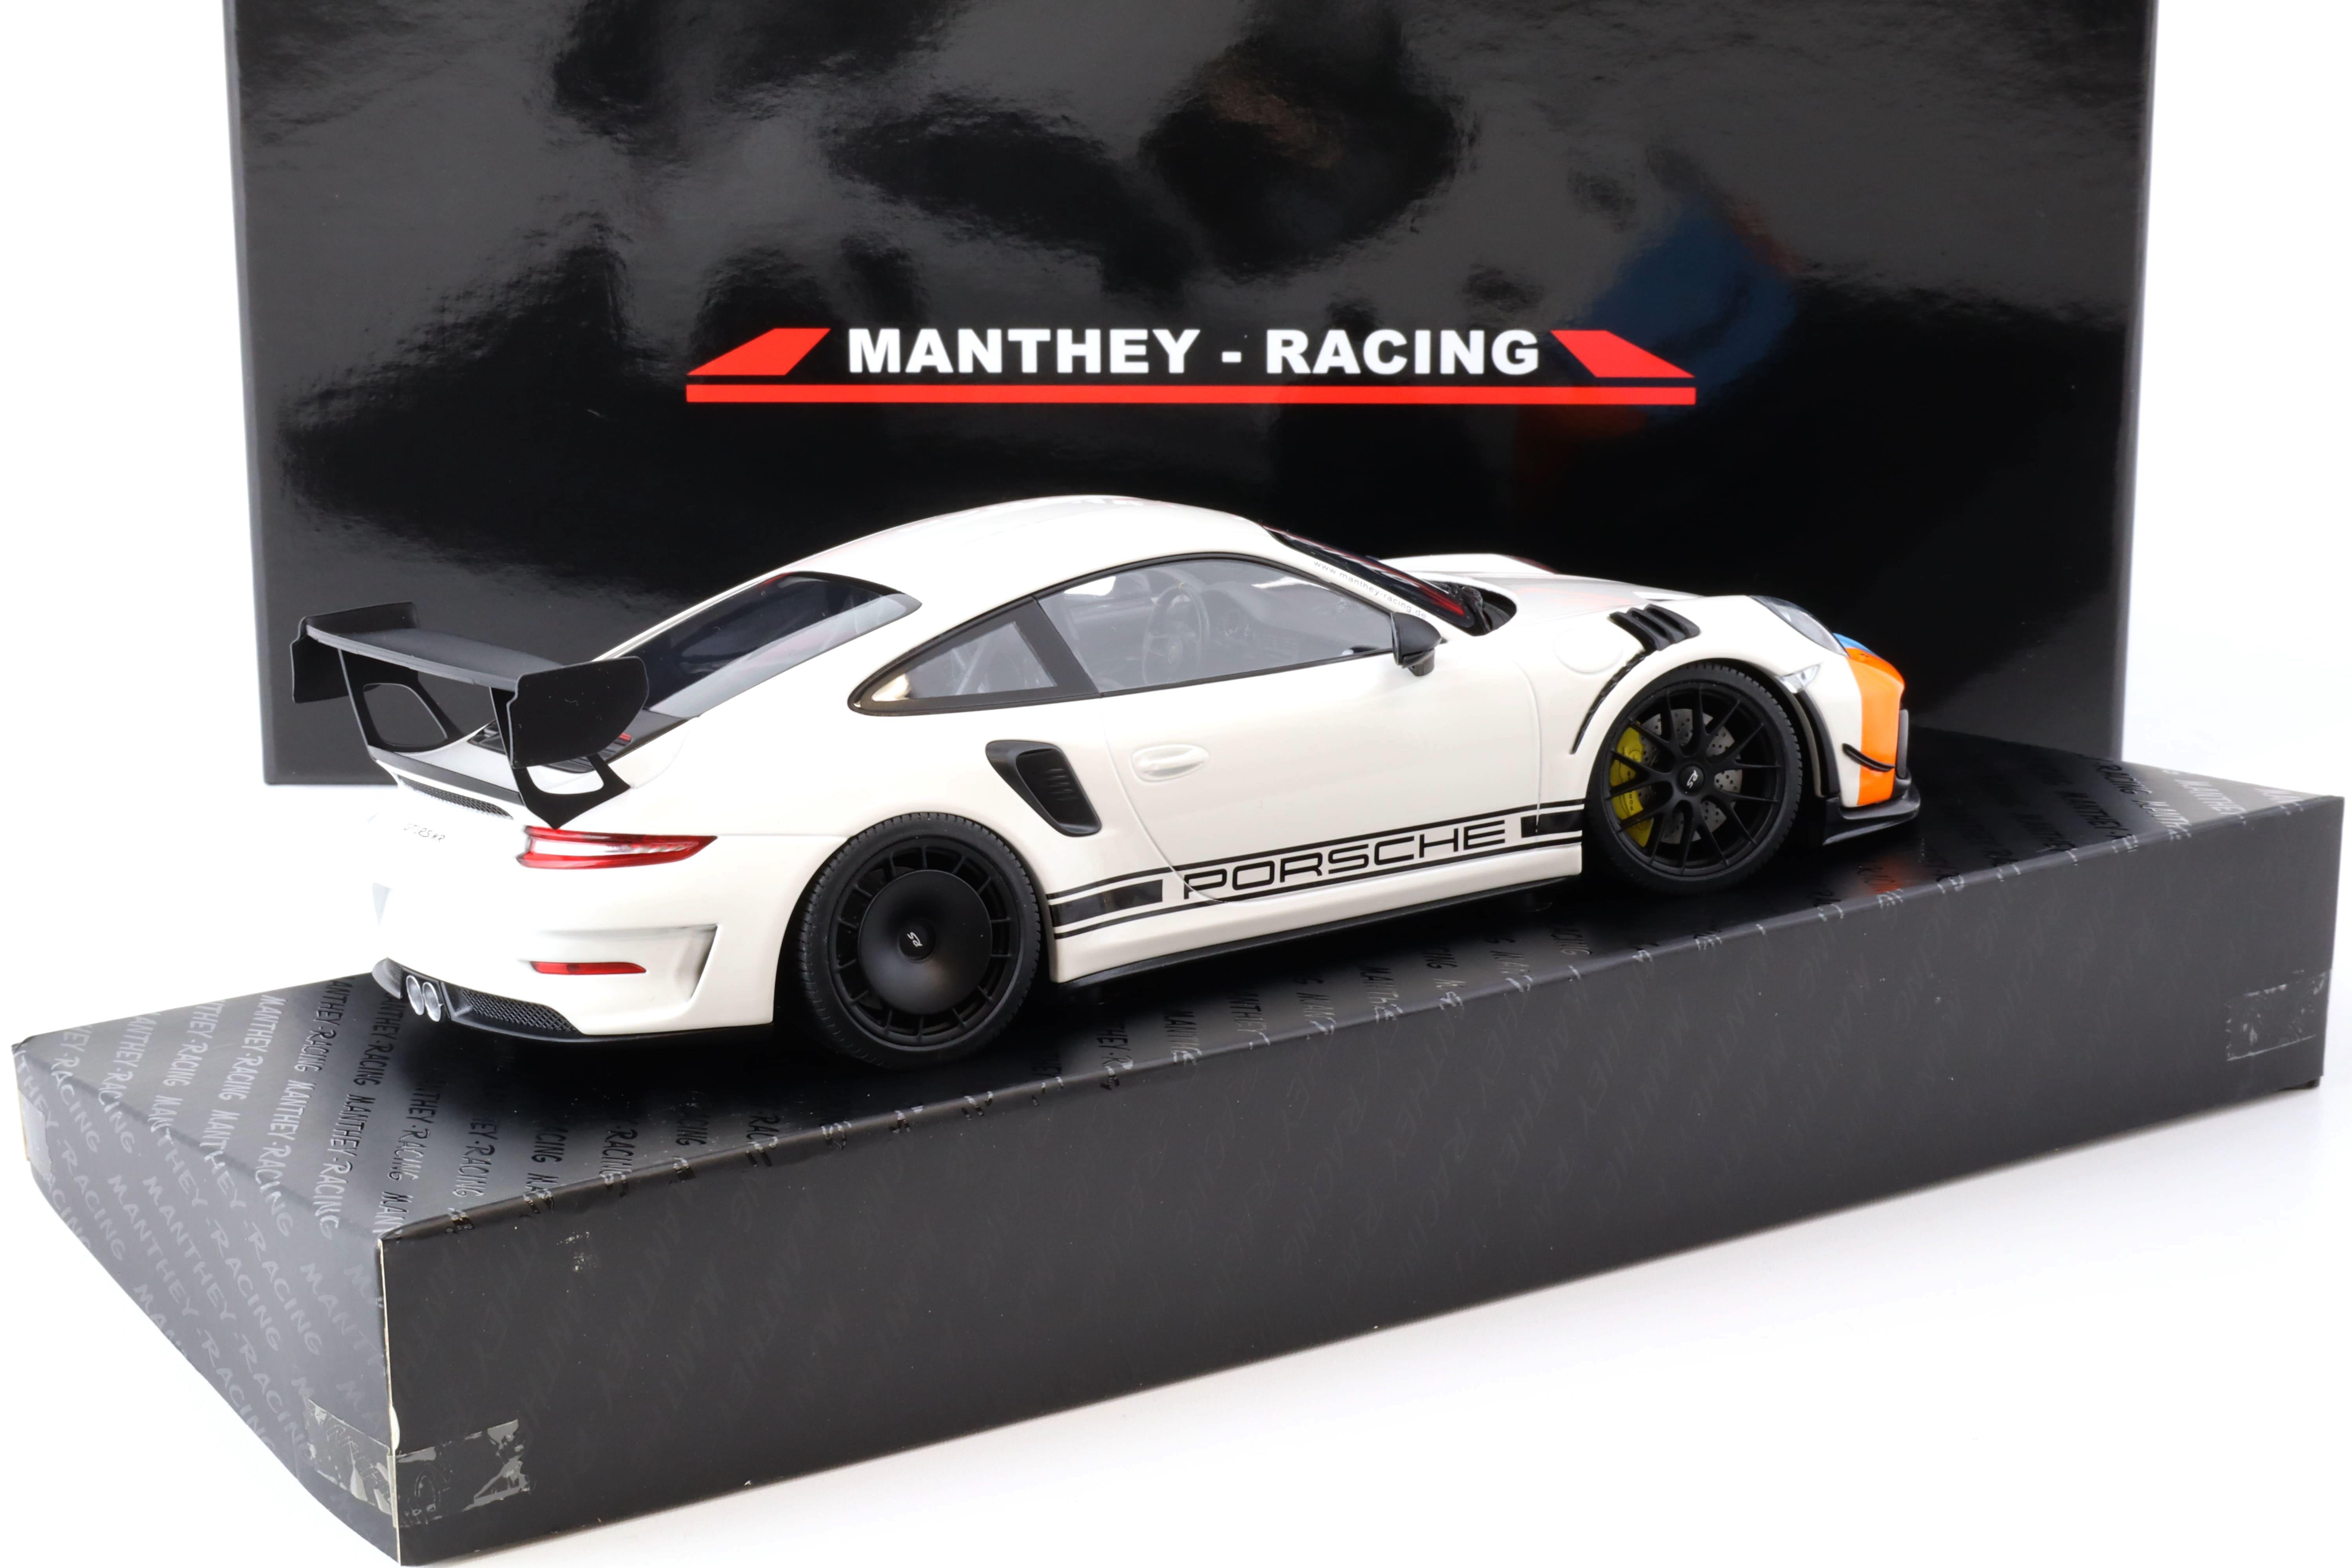 1:18 Minichamps Porsche 911 (991.2) GT3 RS MR white Manthey-Racing Special Box